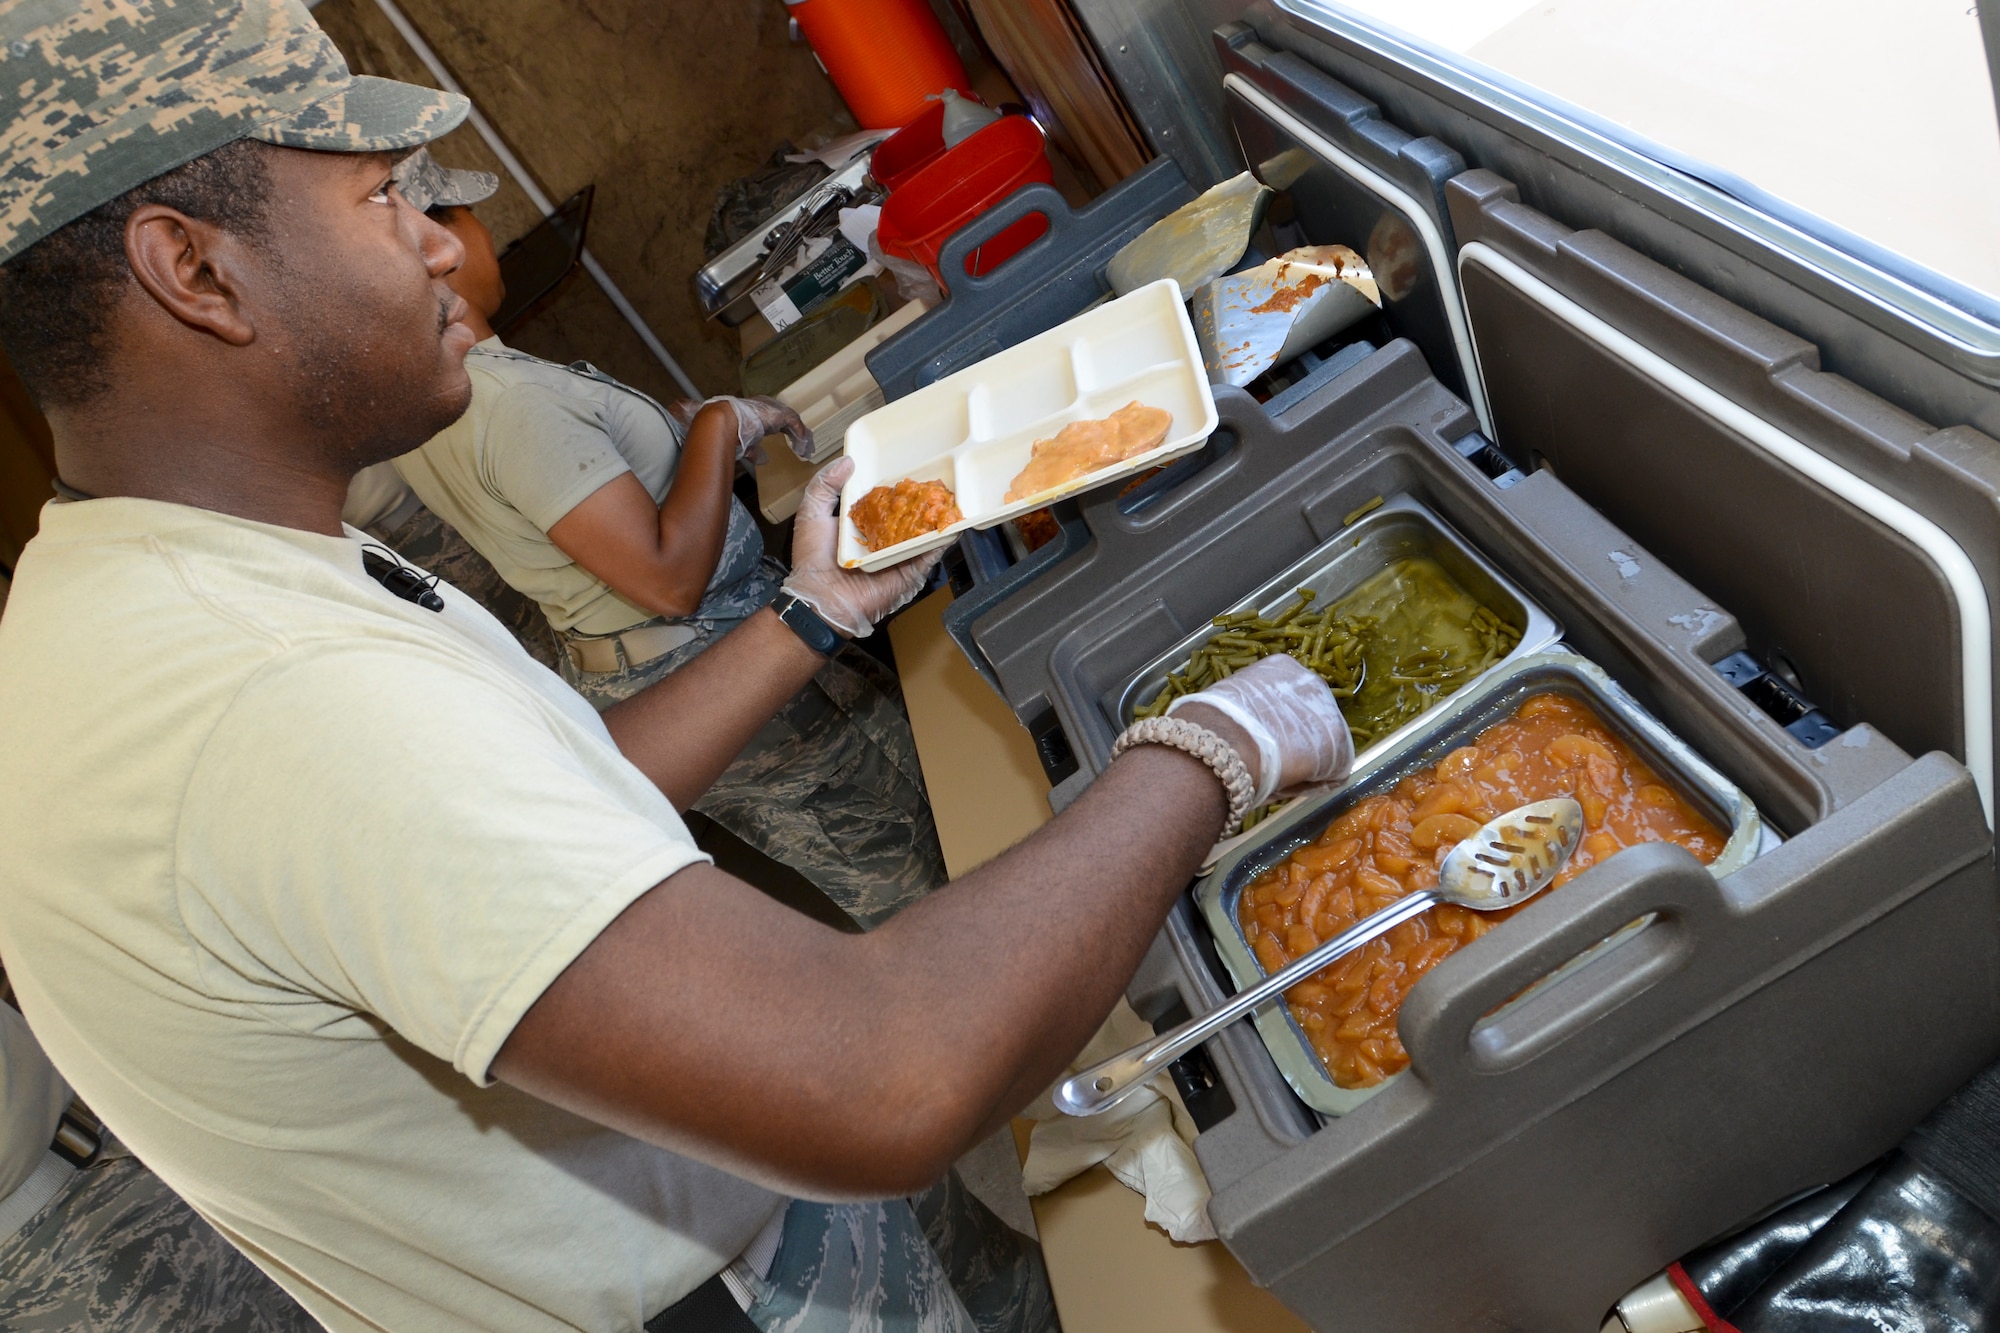 U.S. Air Force Staff Sgt. Quinten Quinones, assigned to the 169th Force Support Squadron’s Services Flight, serves Unit Ground Rations to South Carolina Air National Guard Airmen at the Georgetown County Airport, S.C., June 4, 2014. Quinones is part of deployable team, which prepares and serves hot meals from a Single Pallet Expeditionary Kitchen. His unit is supporting a hurricane preparedness exercise as part of the Airmen who are working side-by-side with the S.C. Emergency Management Division and first responders from local emergency agencies, to effectively respond to any hurricane that may threaten the state. The exercise is based on a hurricane post-landfall response between federal, state and local agencies, which includes training in communications, first responder skills, with the focus on how to better protect and assist citizens during emergency situations.  (U.S. Air National Guard photo by Tech. Sgt. Jorge Intriago/Released)
